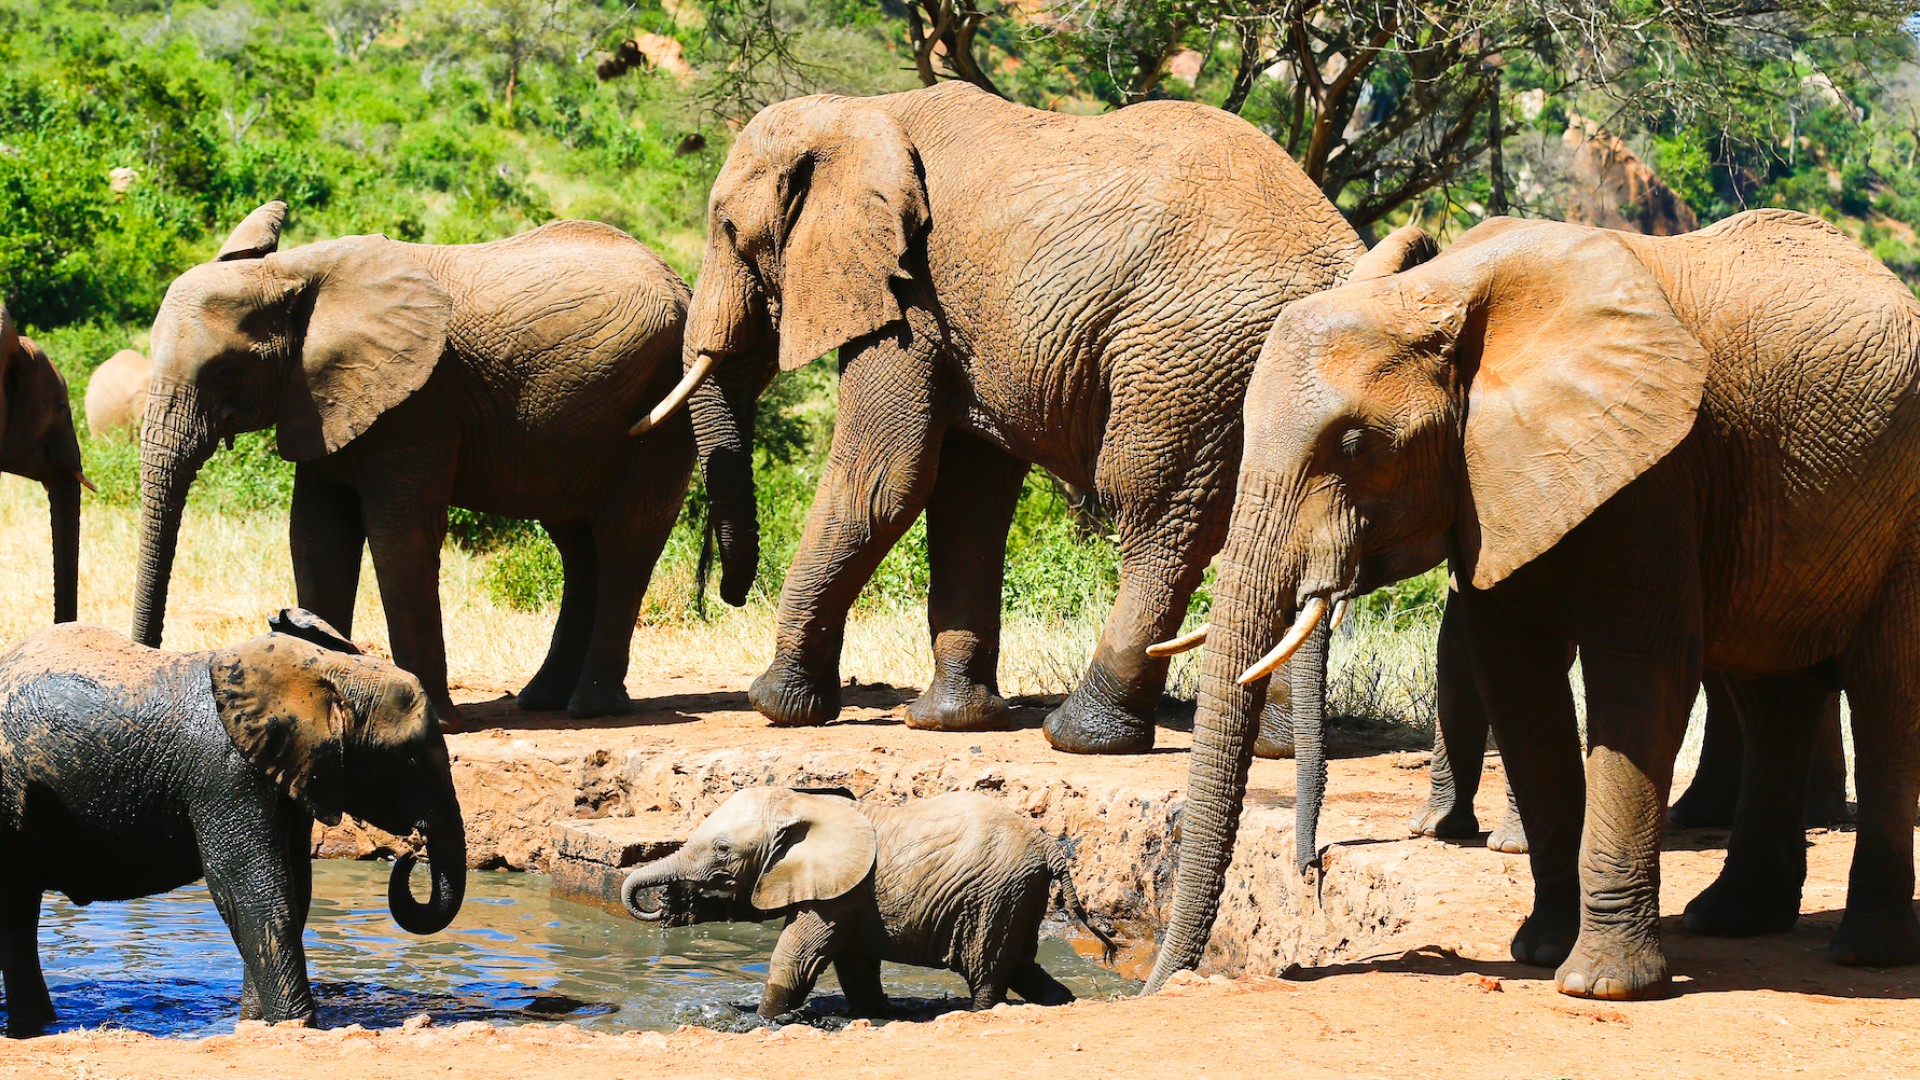 Family of African elephants including a baby elephant walking through a pond on a sunny day